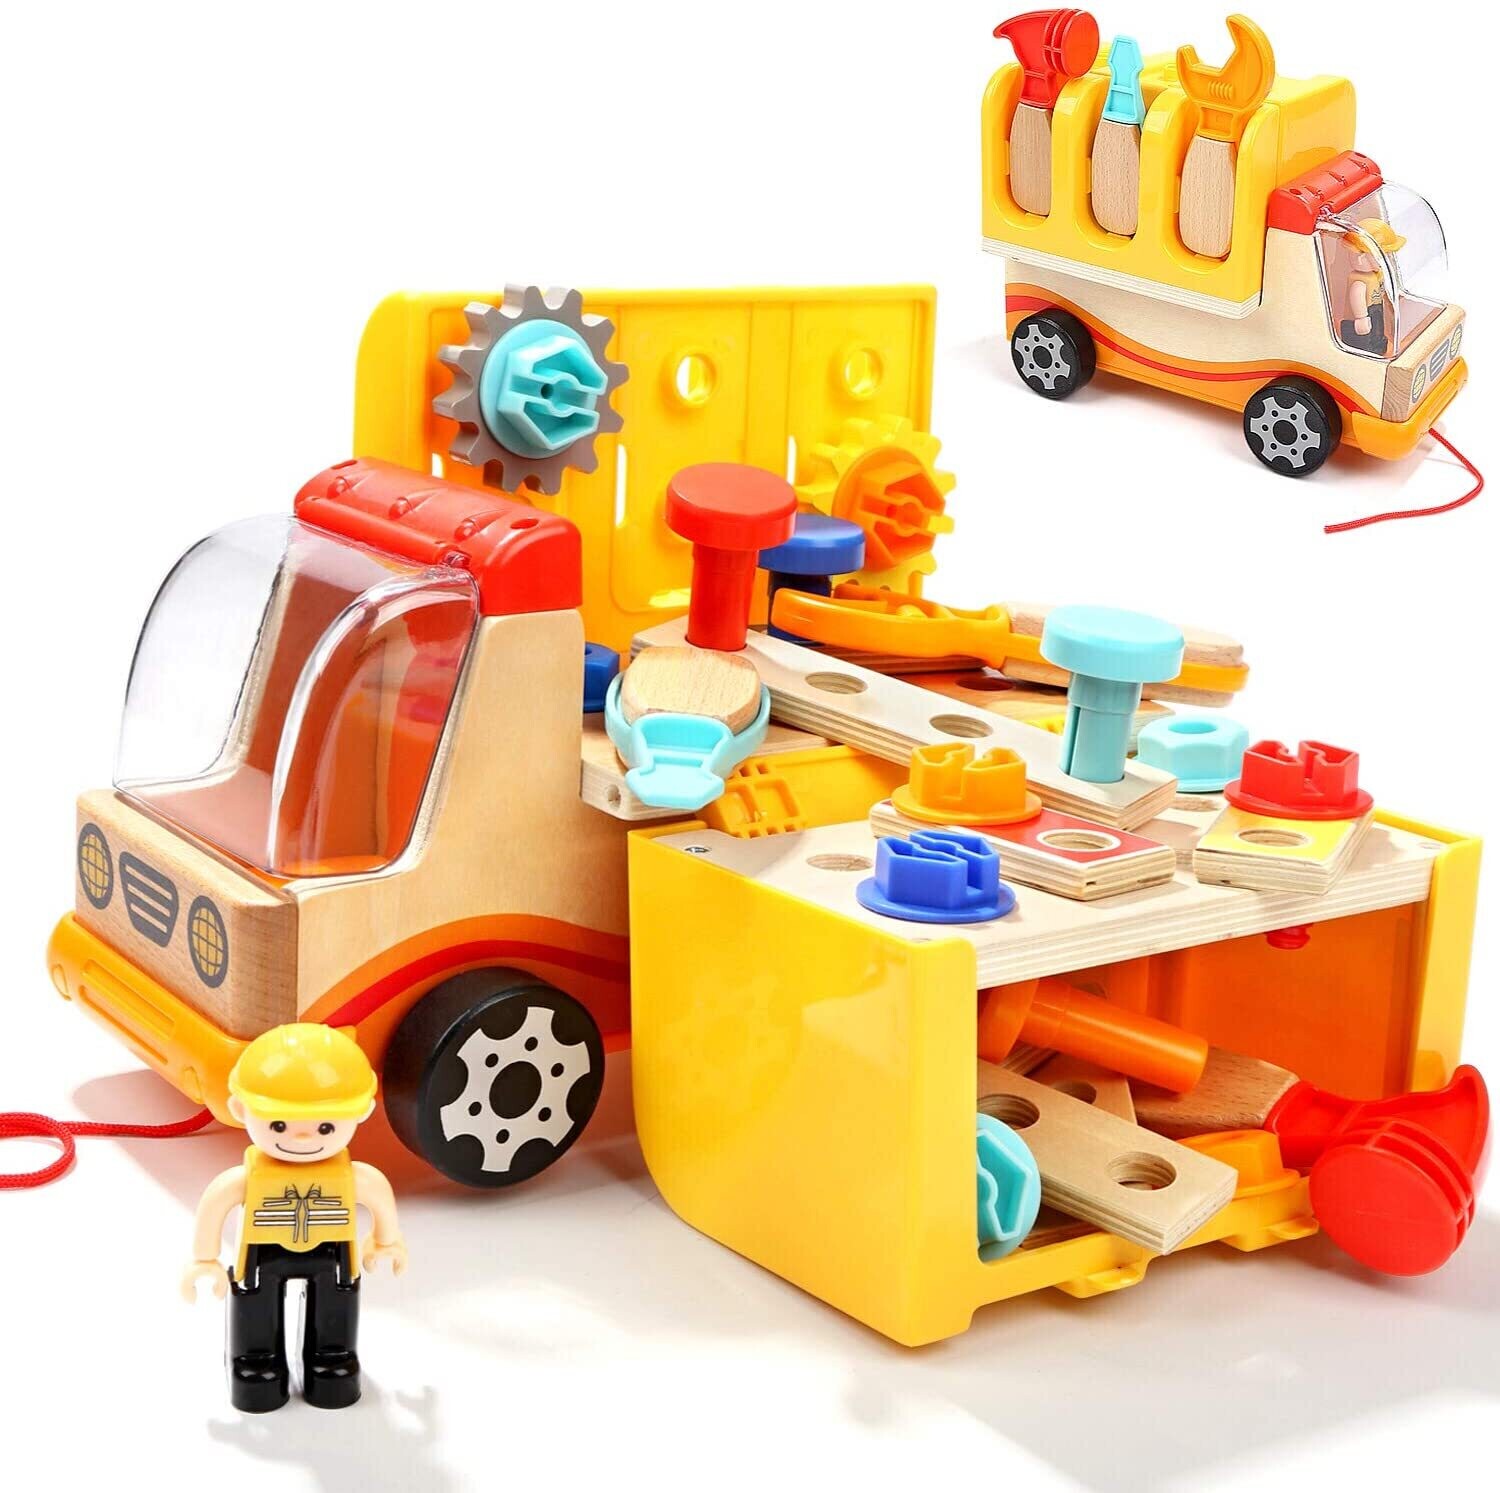 Toddler Tools Set Toys for 2 3 Year Old Boy or Girl Gifts Educational